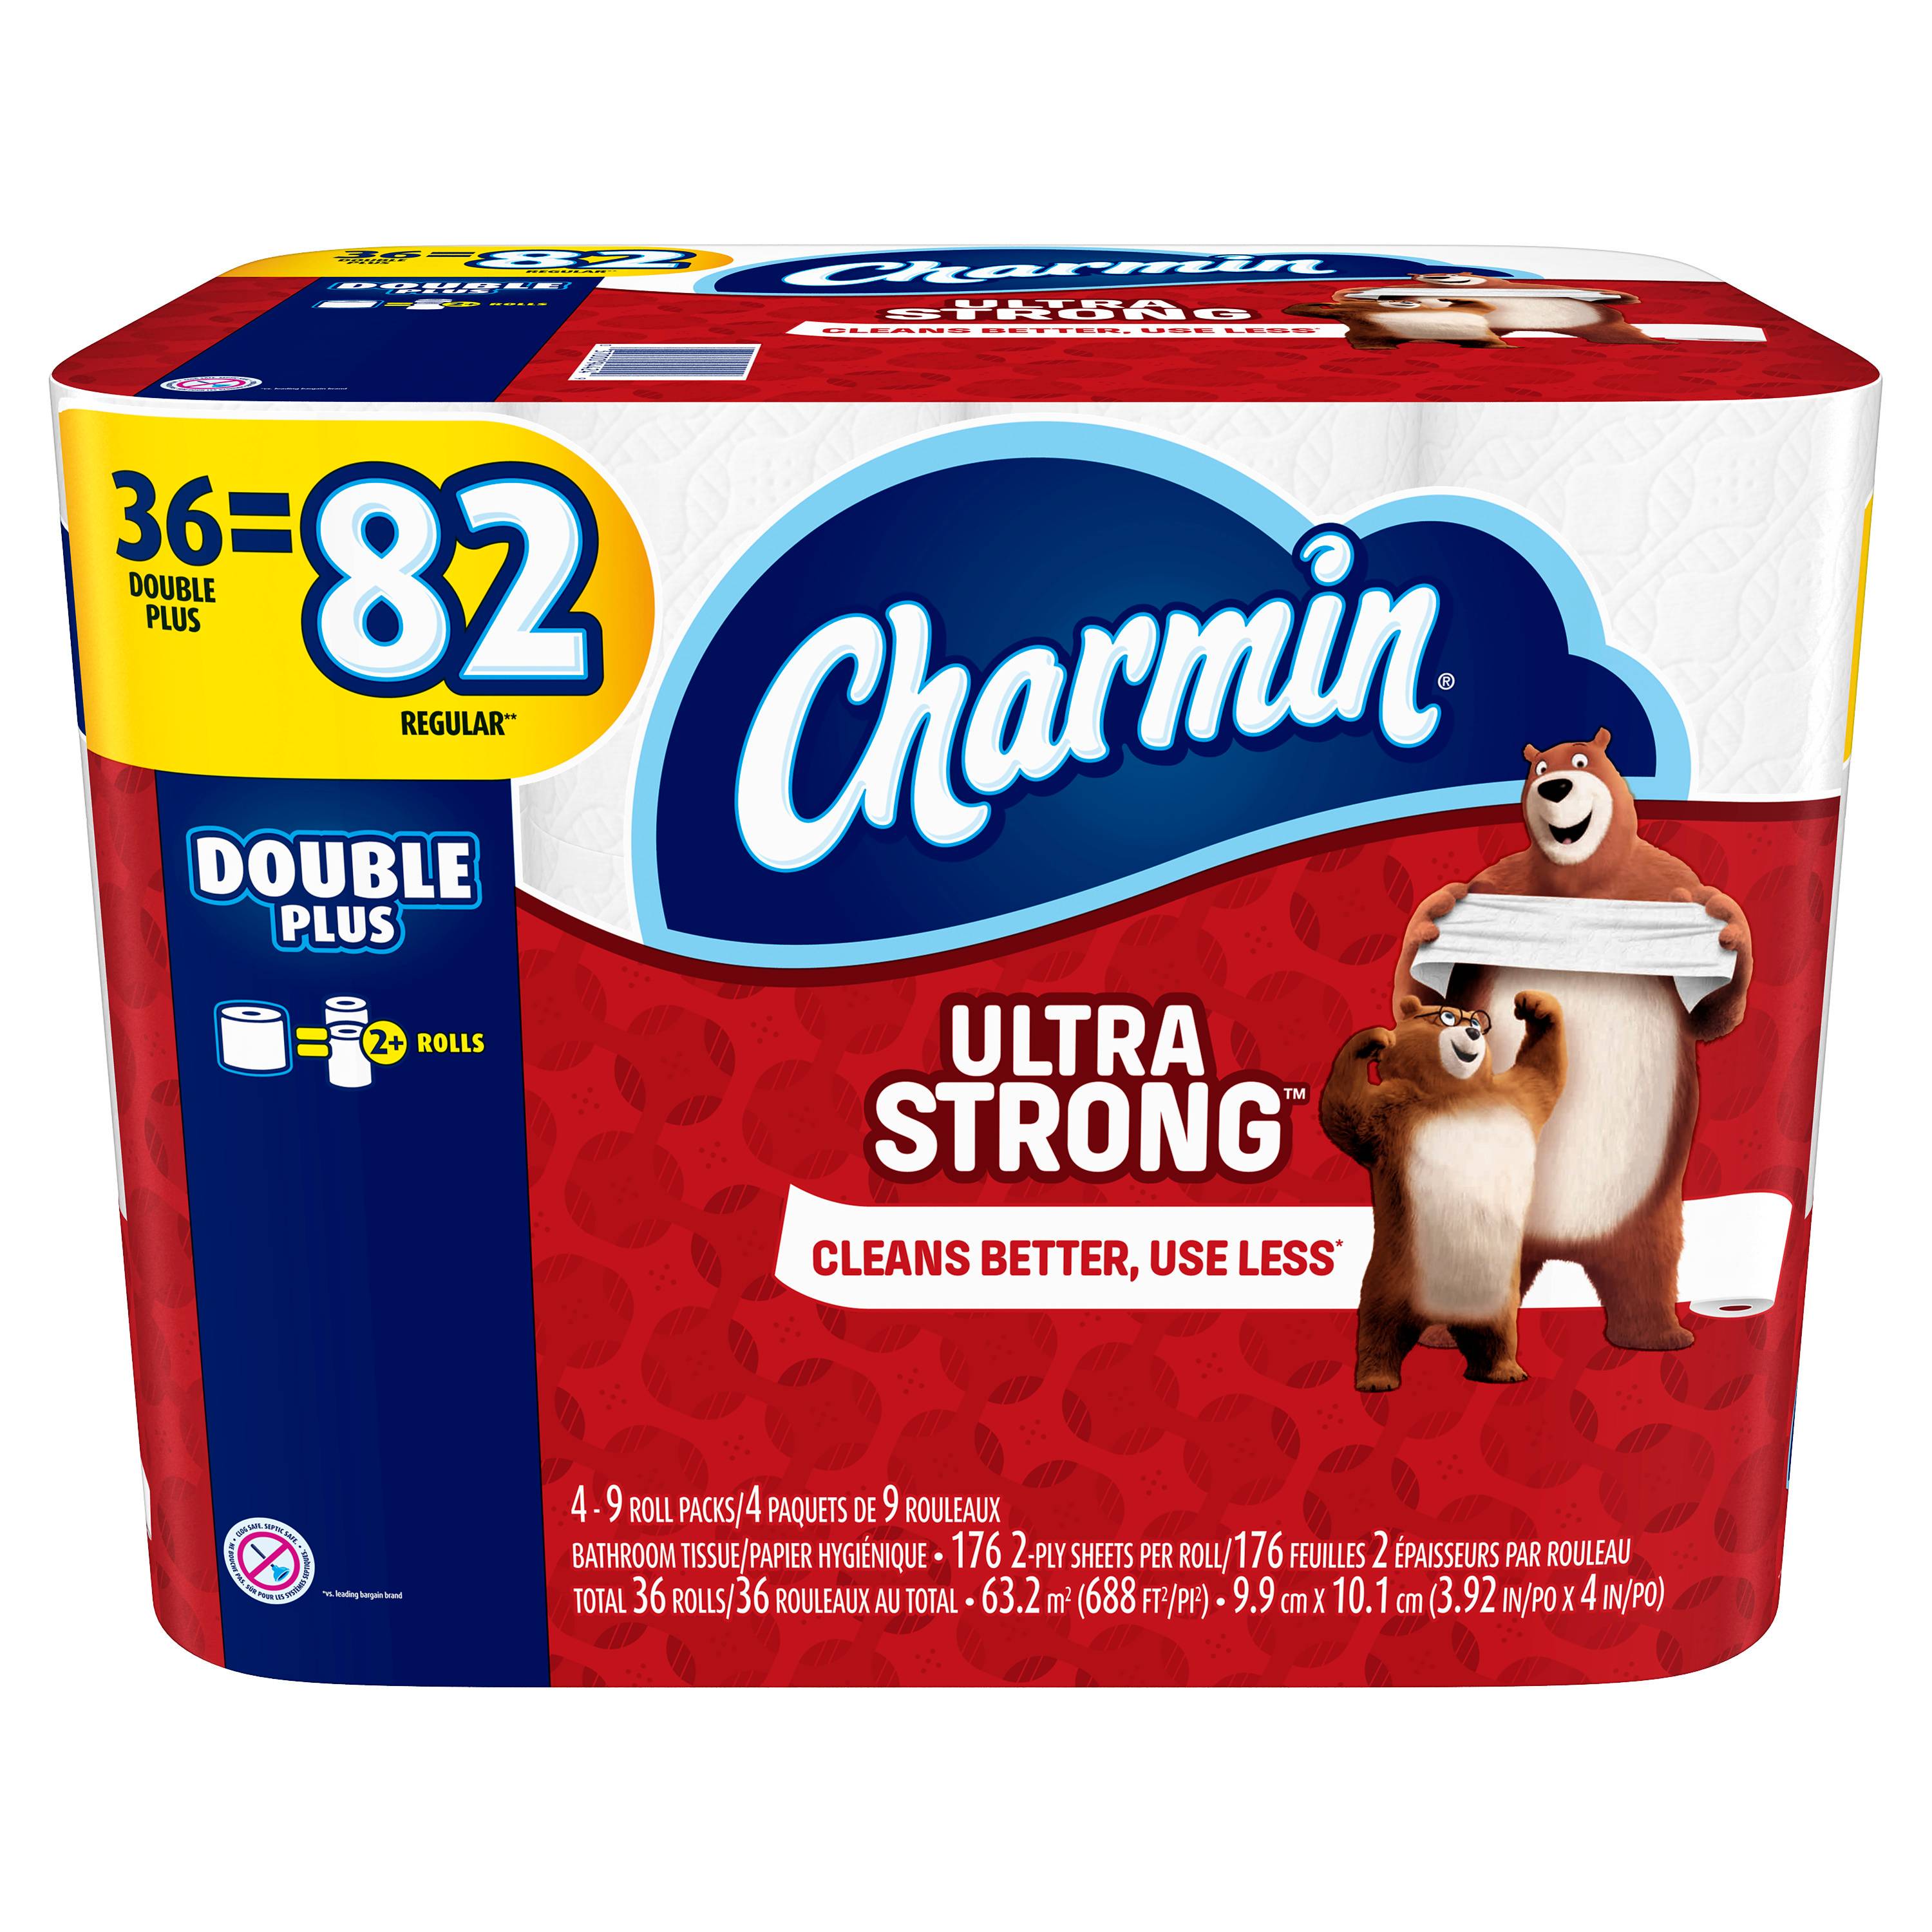 Expires soon! 2-count 36-count Charmin toilet paper for $35 + $10 GC